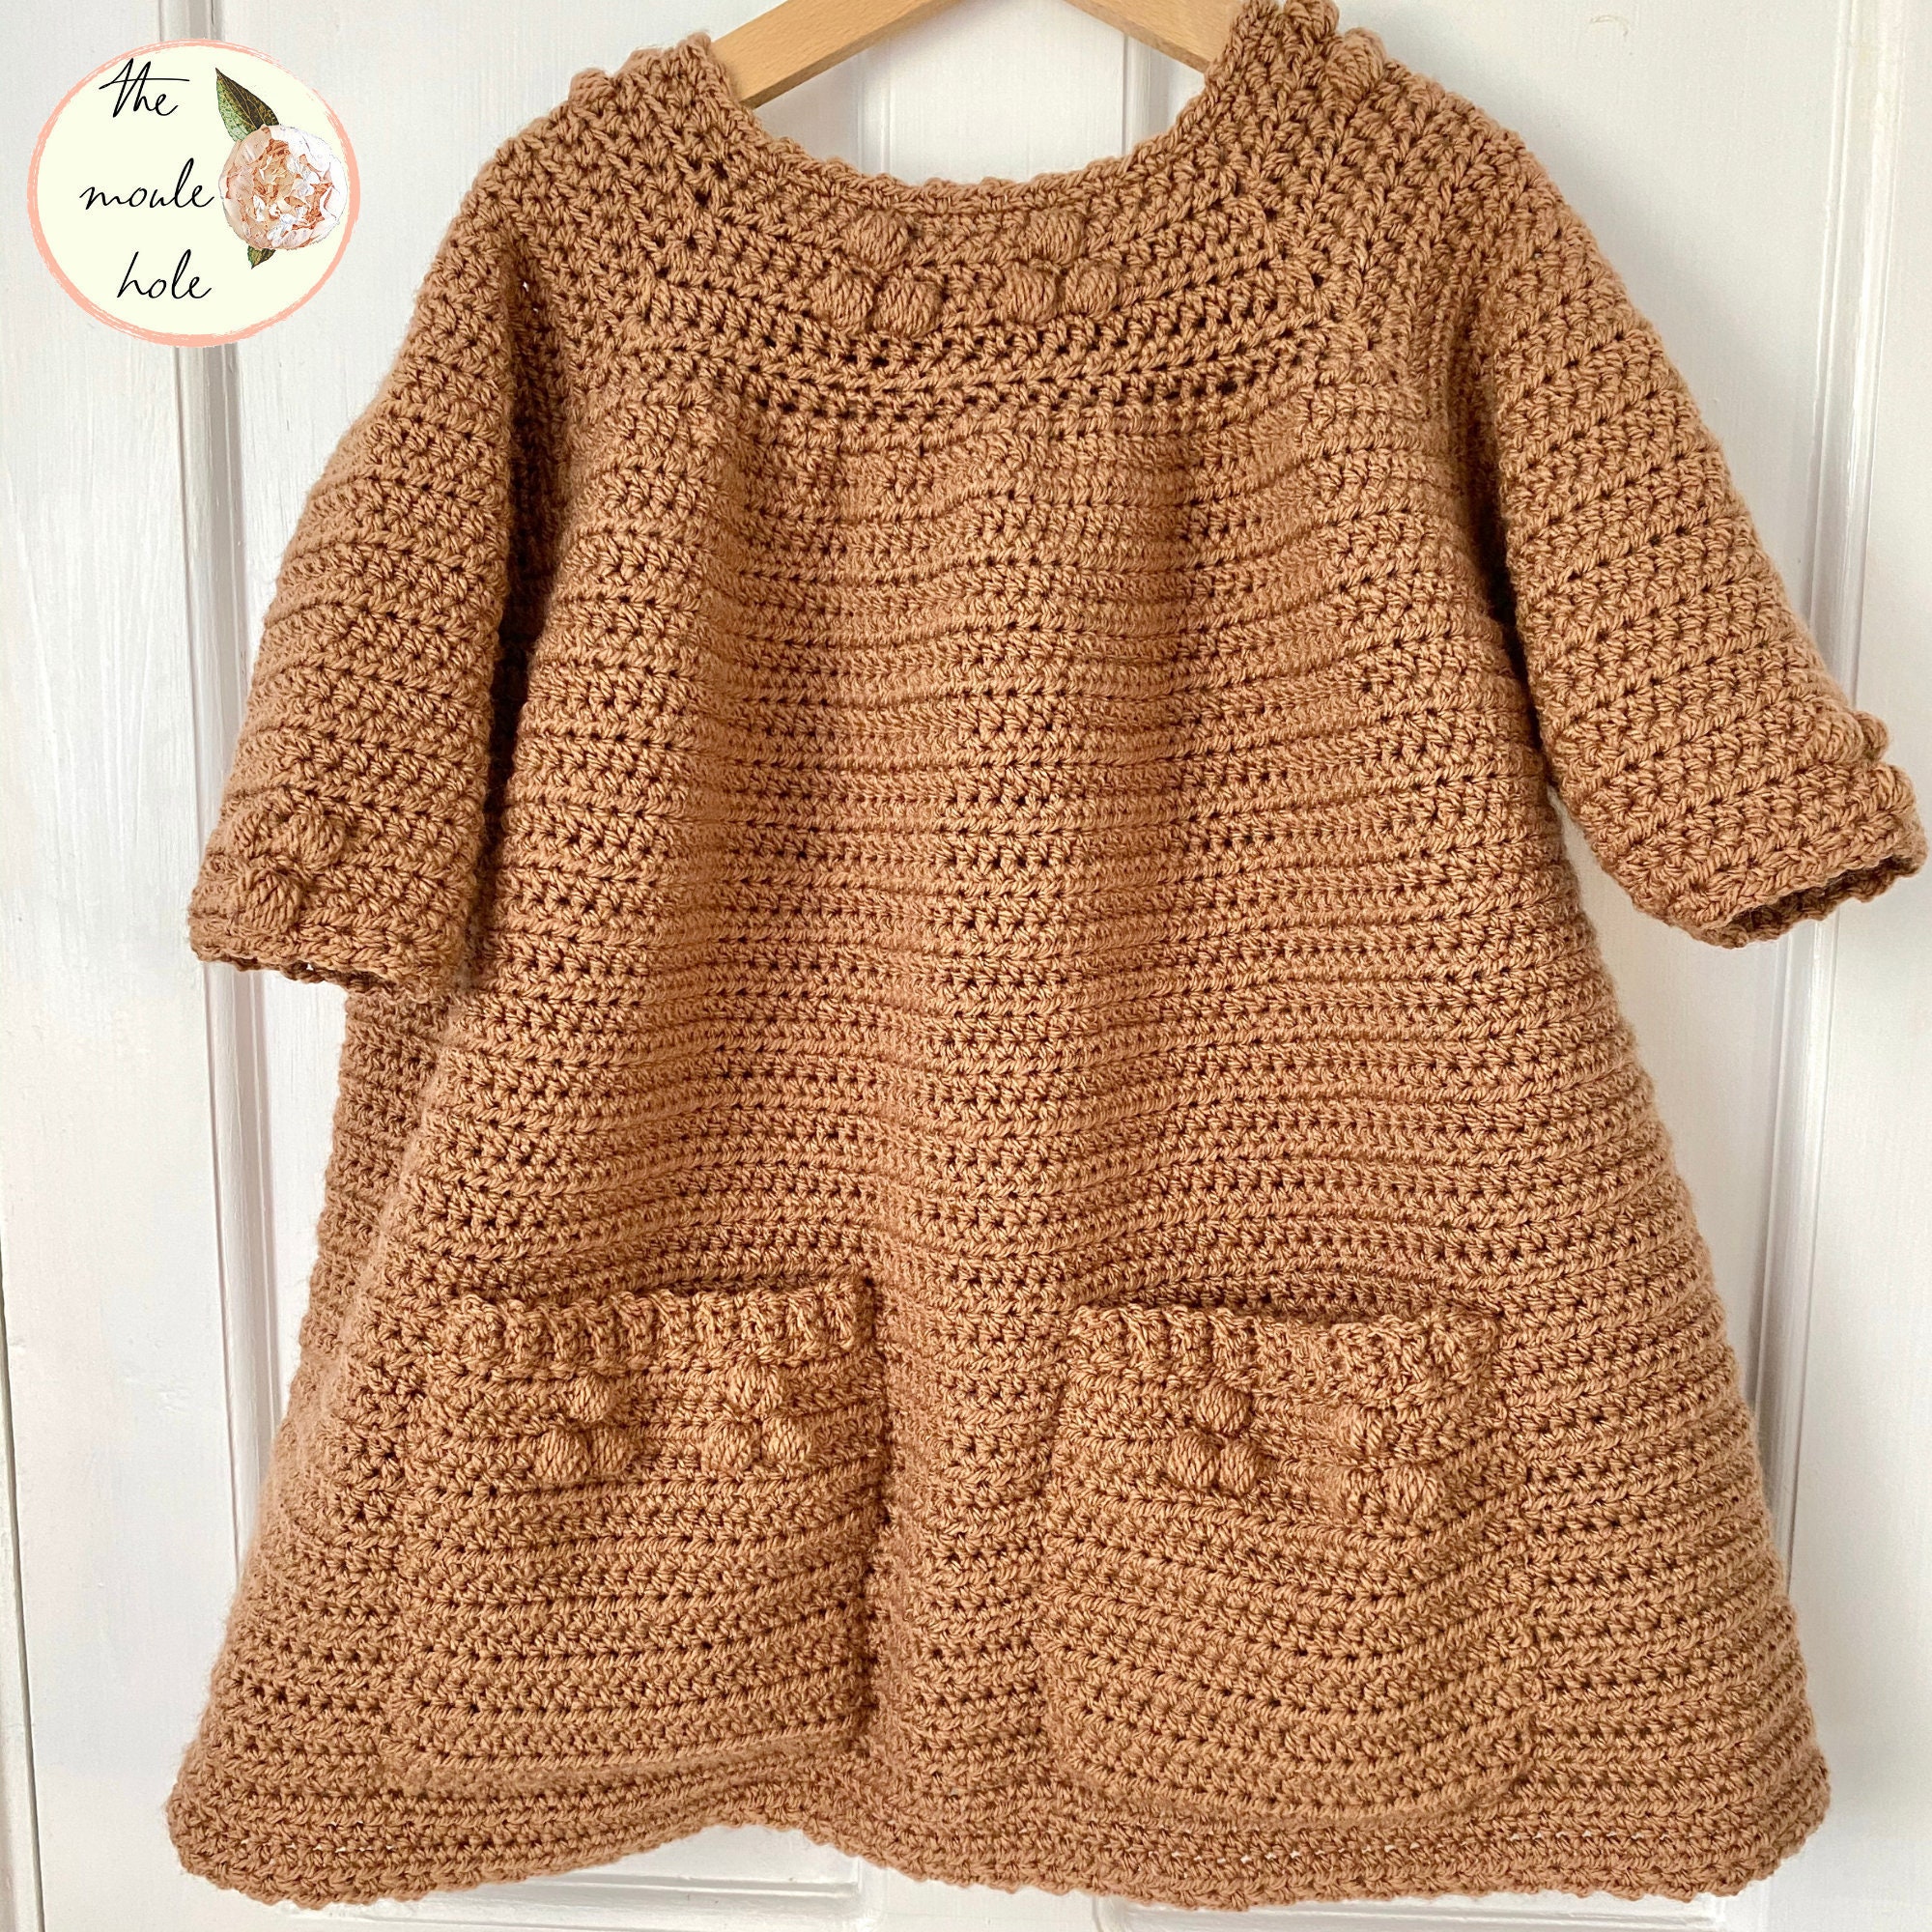 Crochet for Girls: 23 Dresses, Sweaters, and Accessories - 9780811736510